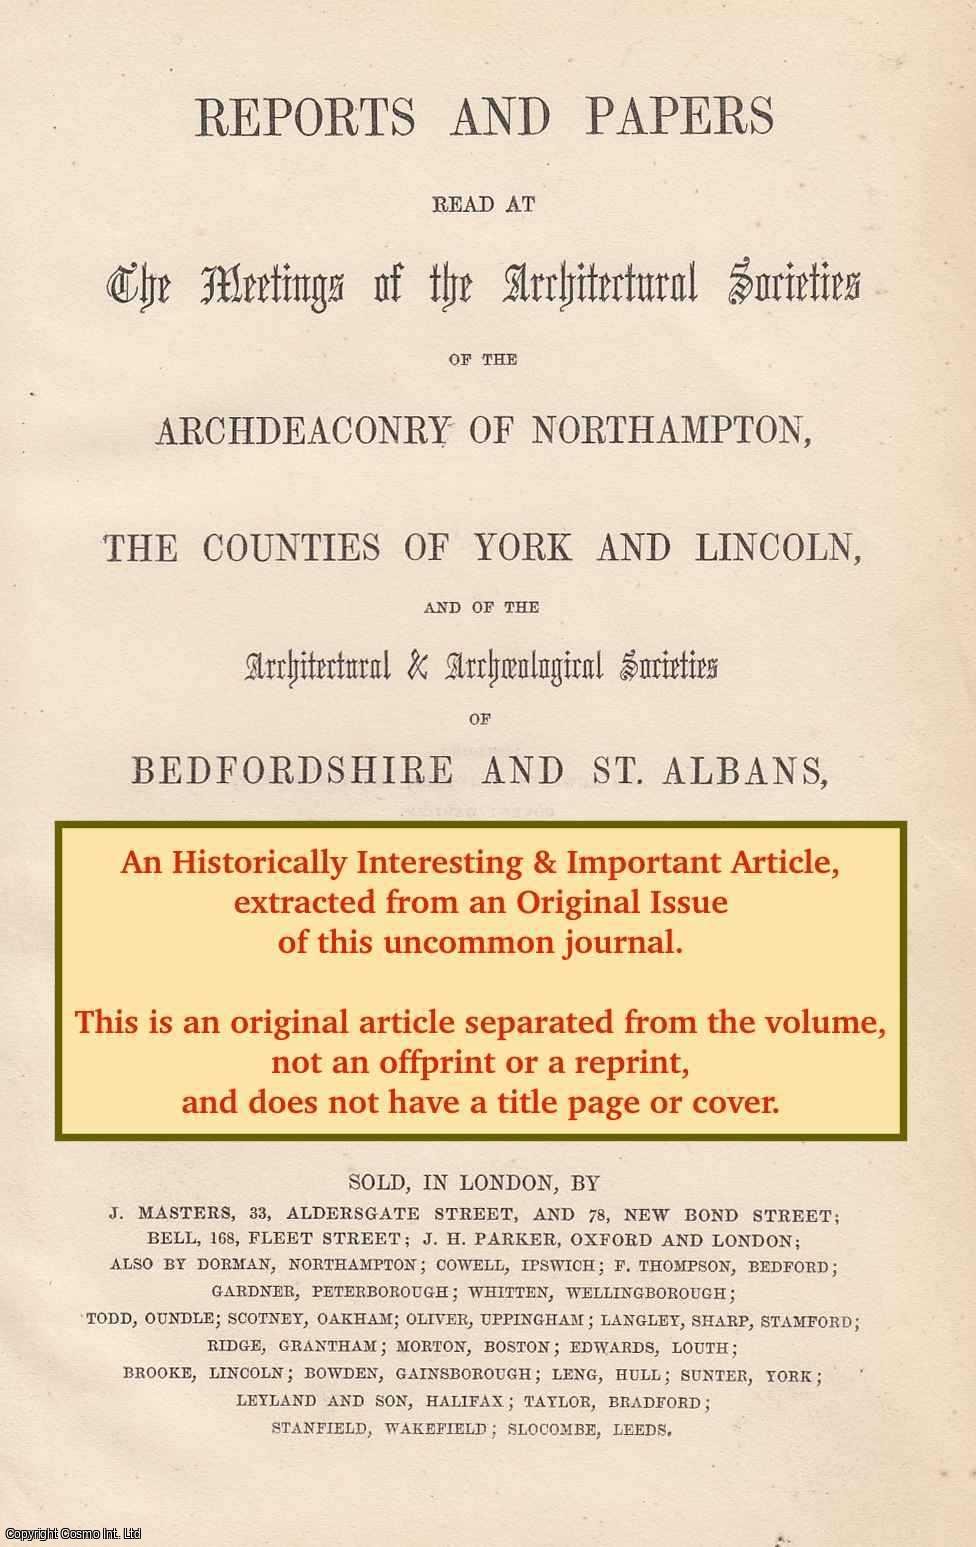 S. A. Johnson - Aspects of Enclosure and Changing Agricultural Landscapes in Lindsey from The Sixteenth to The Nineteenth Century. An original article from Associated Architectural Societies, Reports and Papers, 1962.